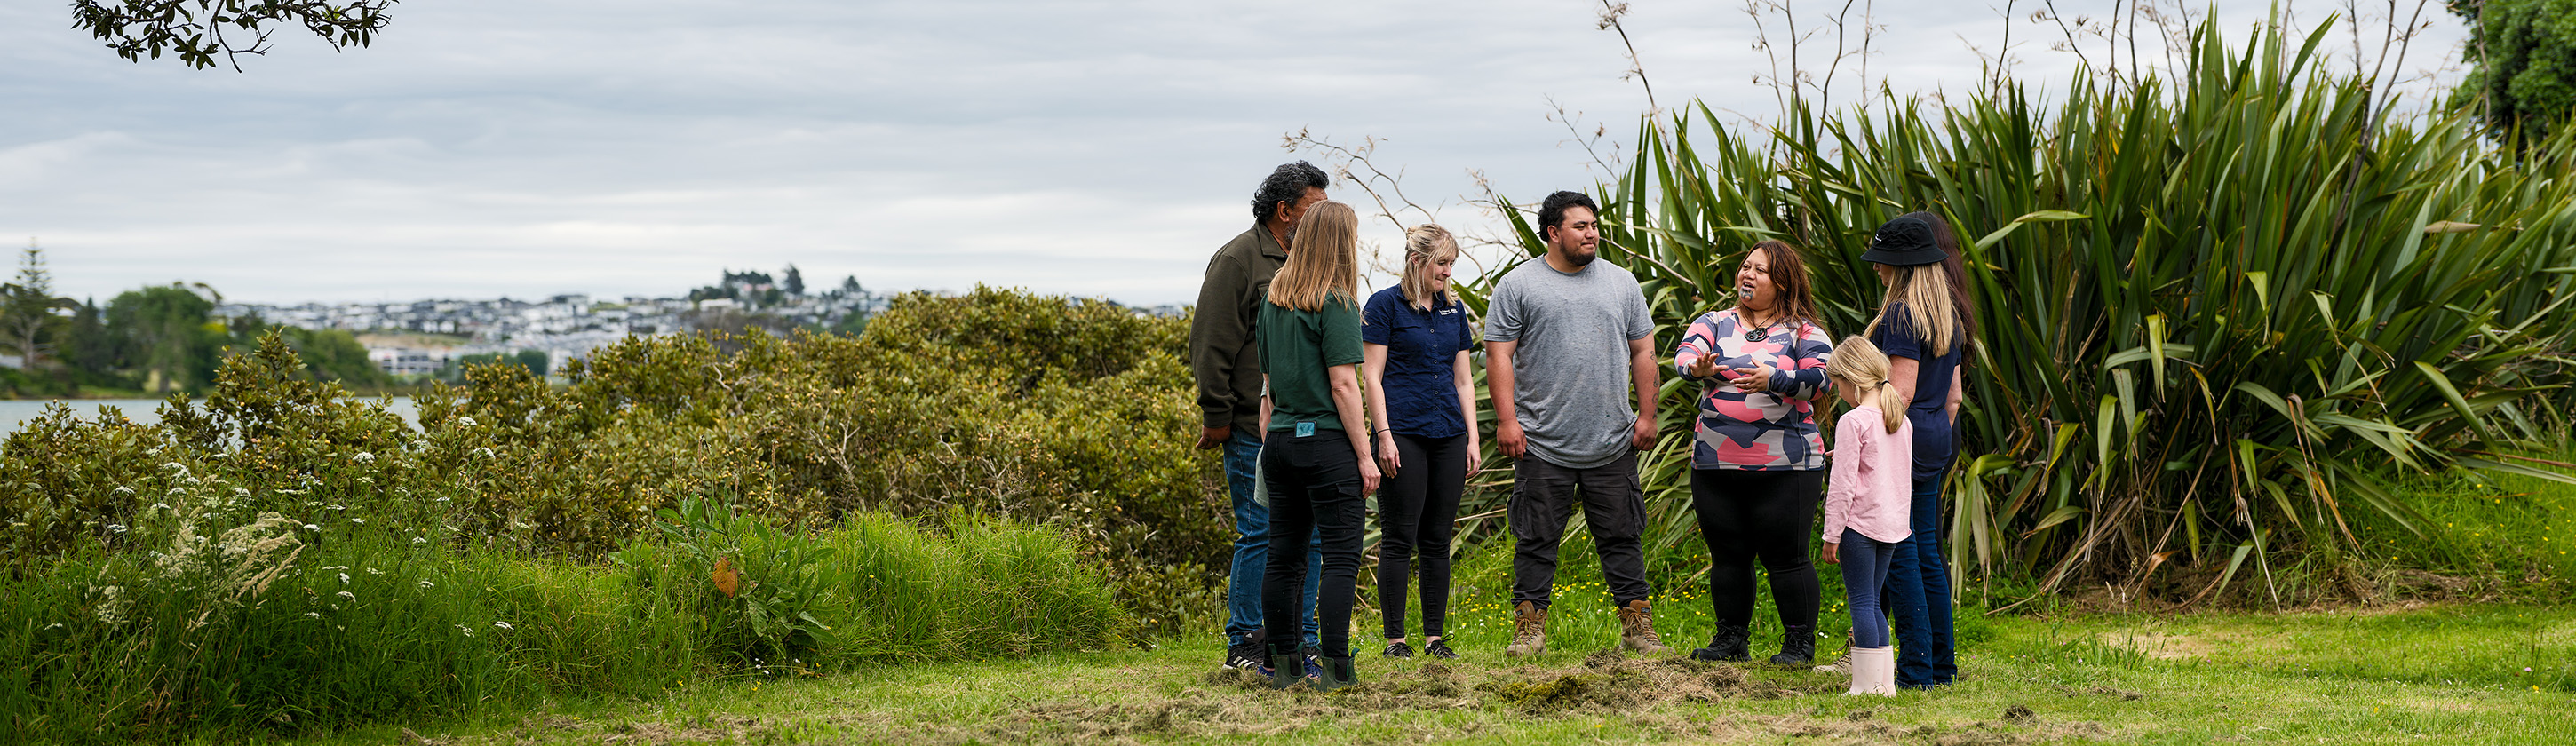 A group of people from iwi, community and Auckland Council are in a park in Ōrewa on Auckland’s nor-eastern shores. They are standing listening to the Māori woman in the group who is Te Ao Rosieur from Ngāti Manuhiri. A large flax/harakeke plant, lush greenery and mangroves are in the background. The image conveys how everyone can work together to support nature.